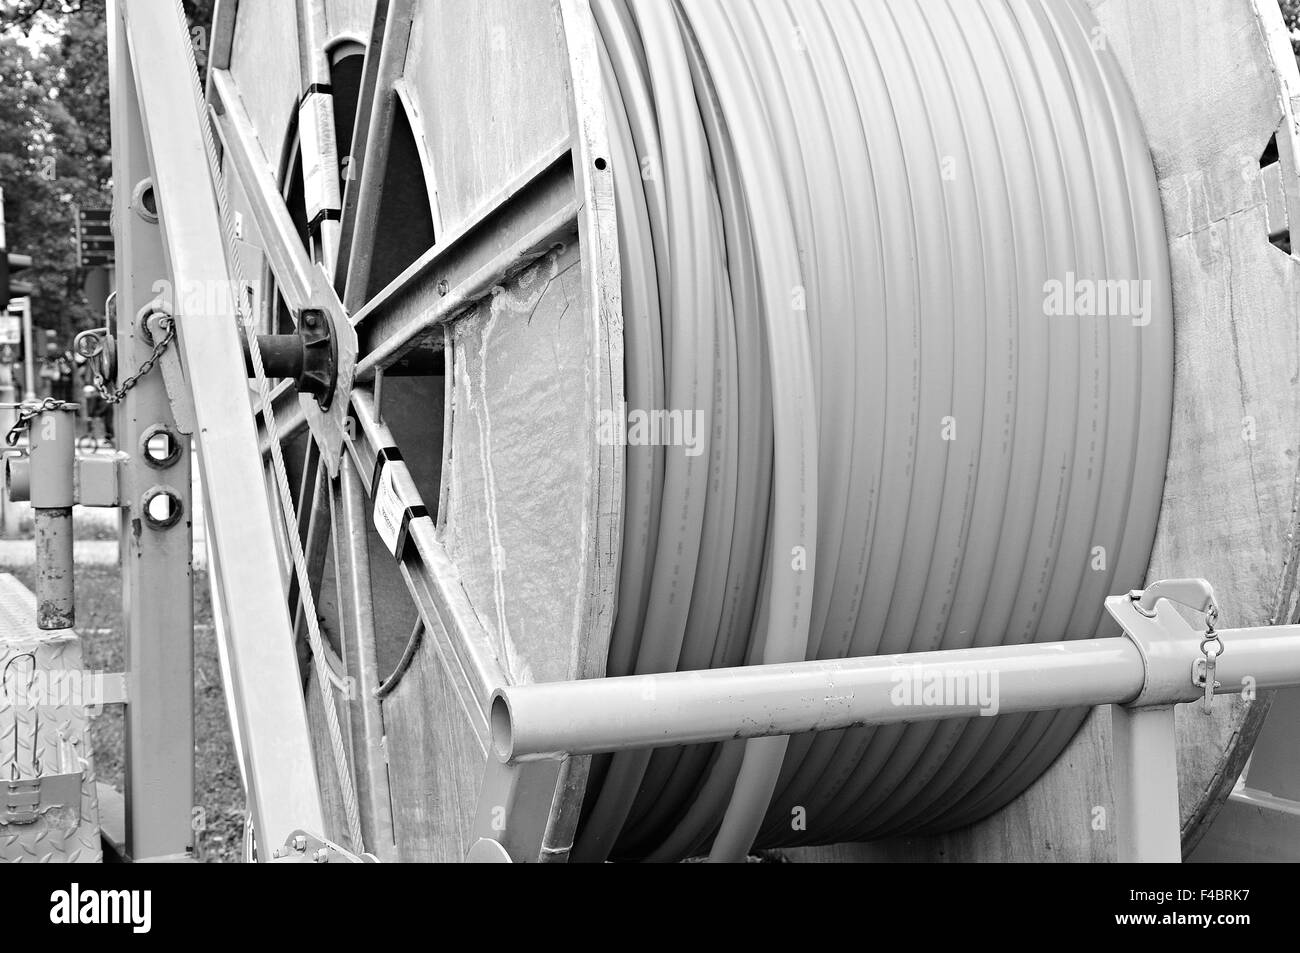 Broadband cable drum with laying trailer Stock Photo